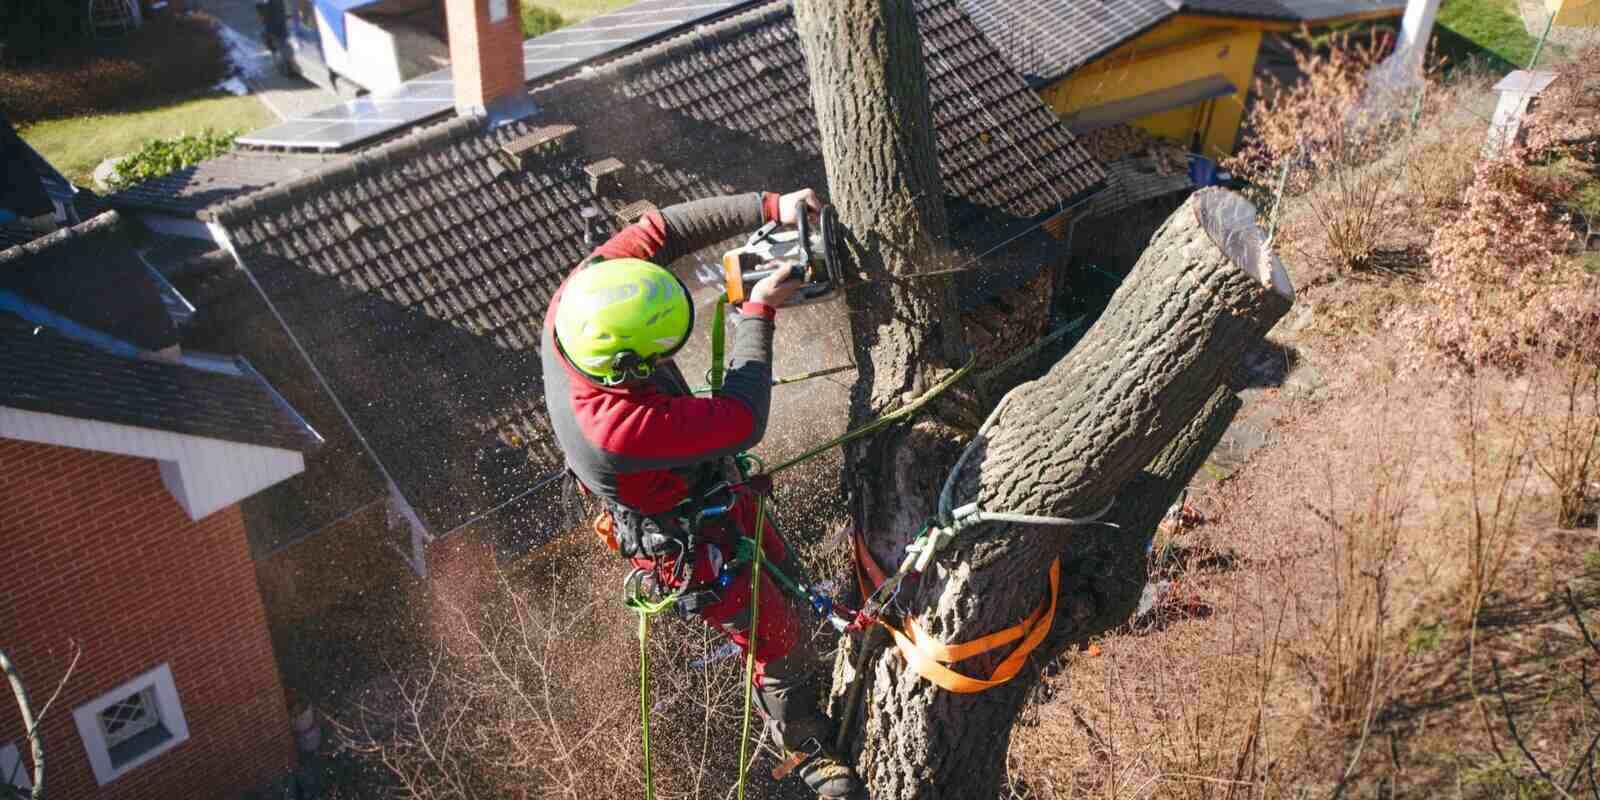 How Much Does Arborist Insurance Cost?